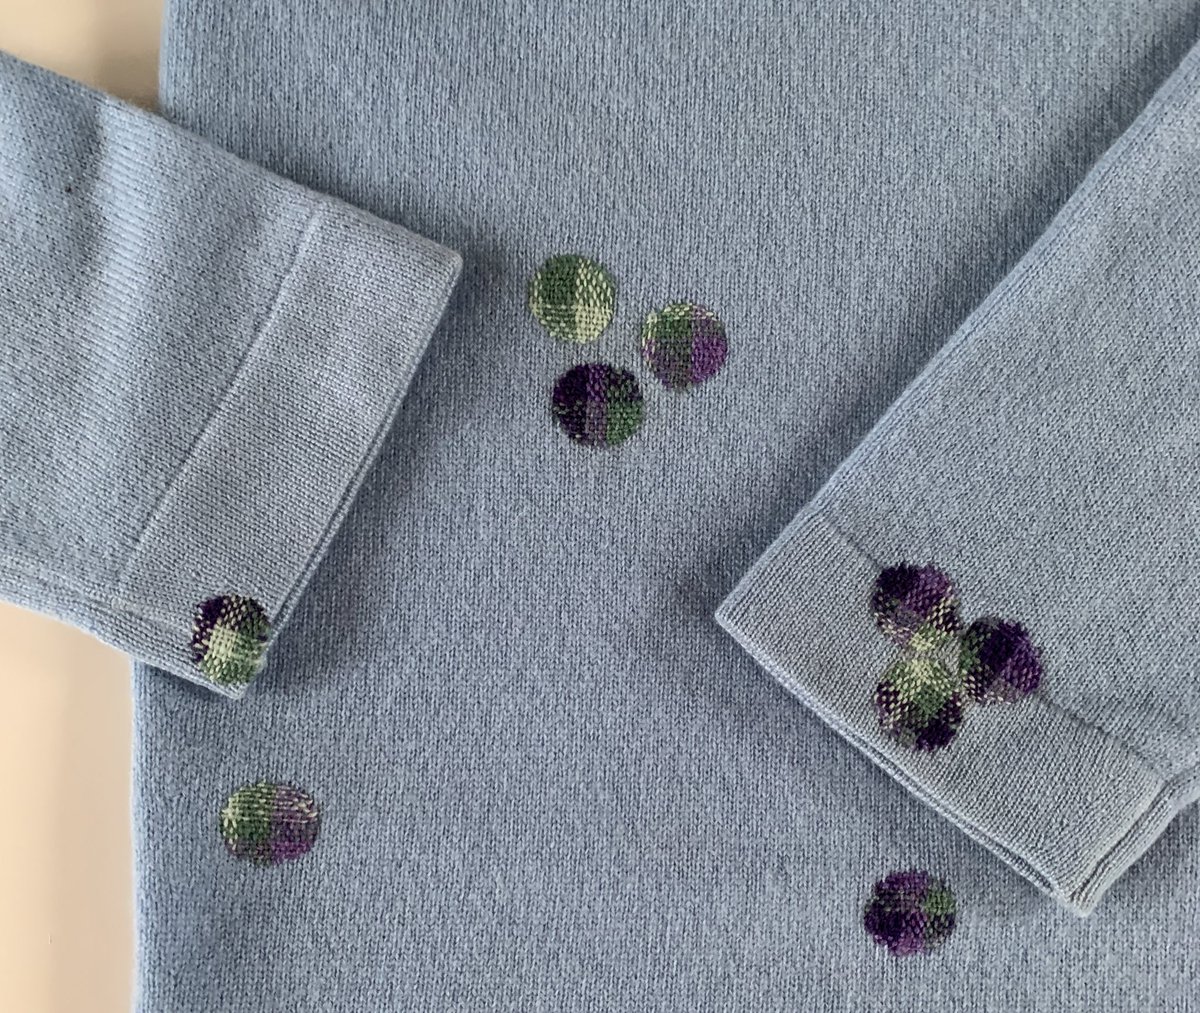 Tiny holes and stains turned into little darned dots! #visiblemending #darning #repair #makedoandmend #reducewaste #lovedclotheslast #SustainableLiving